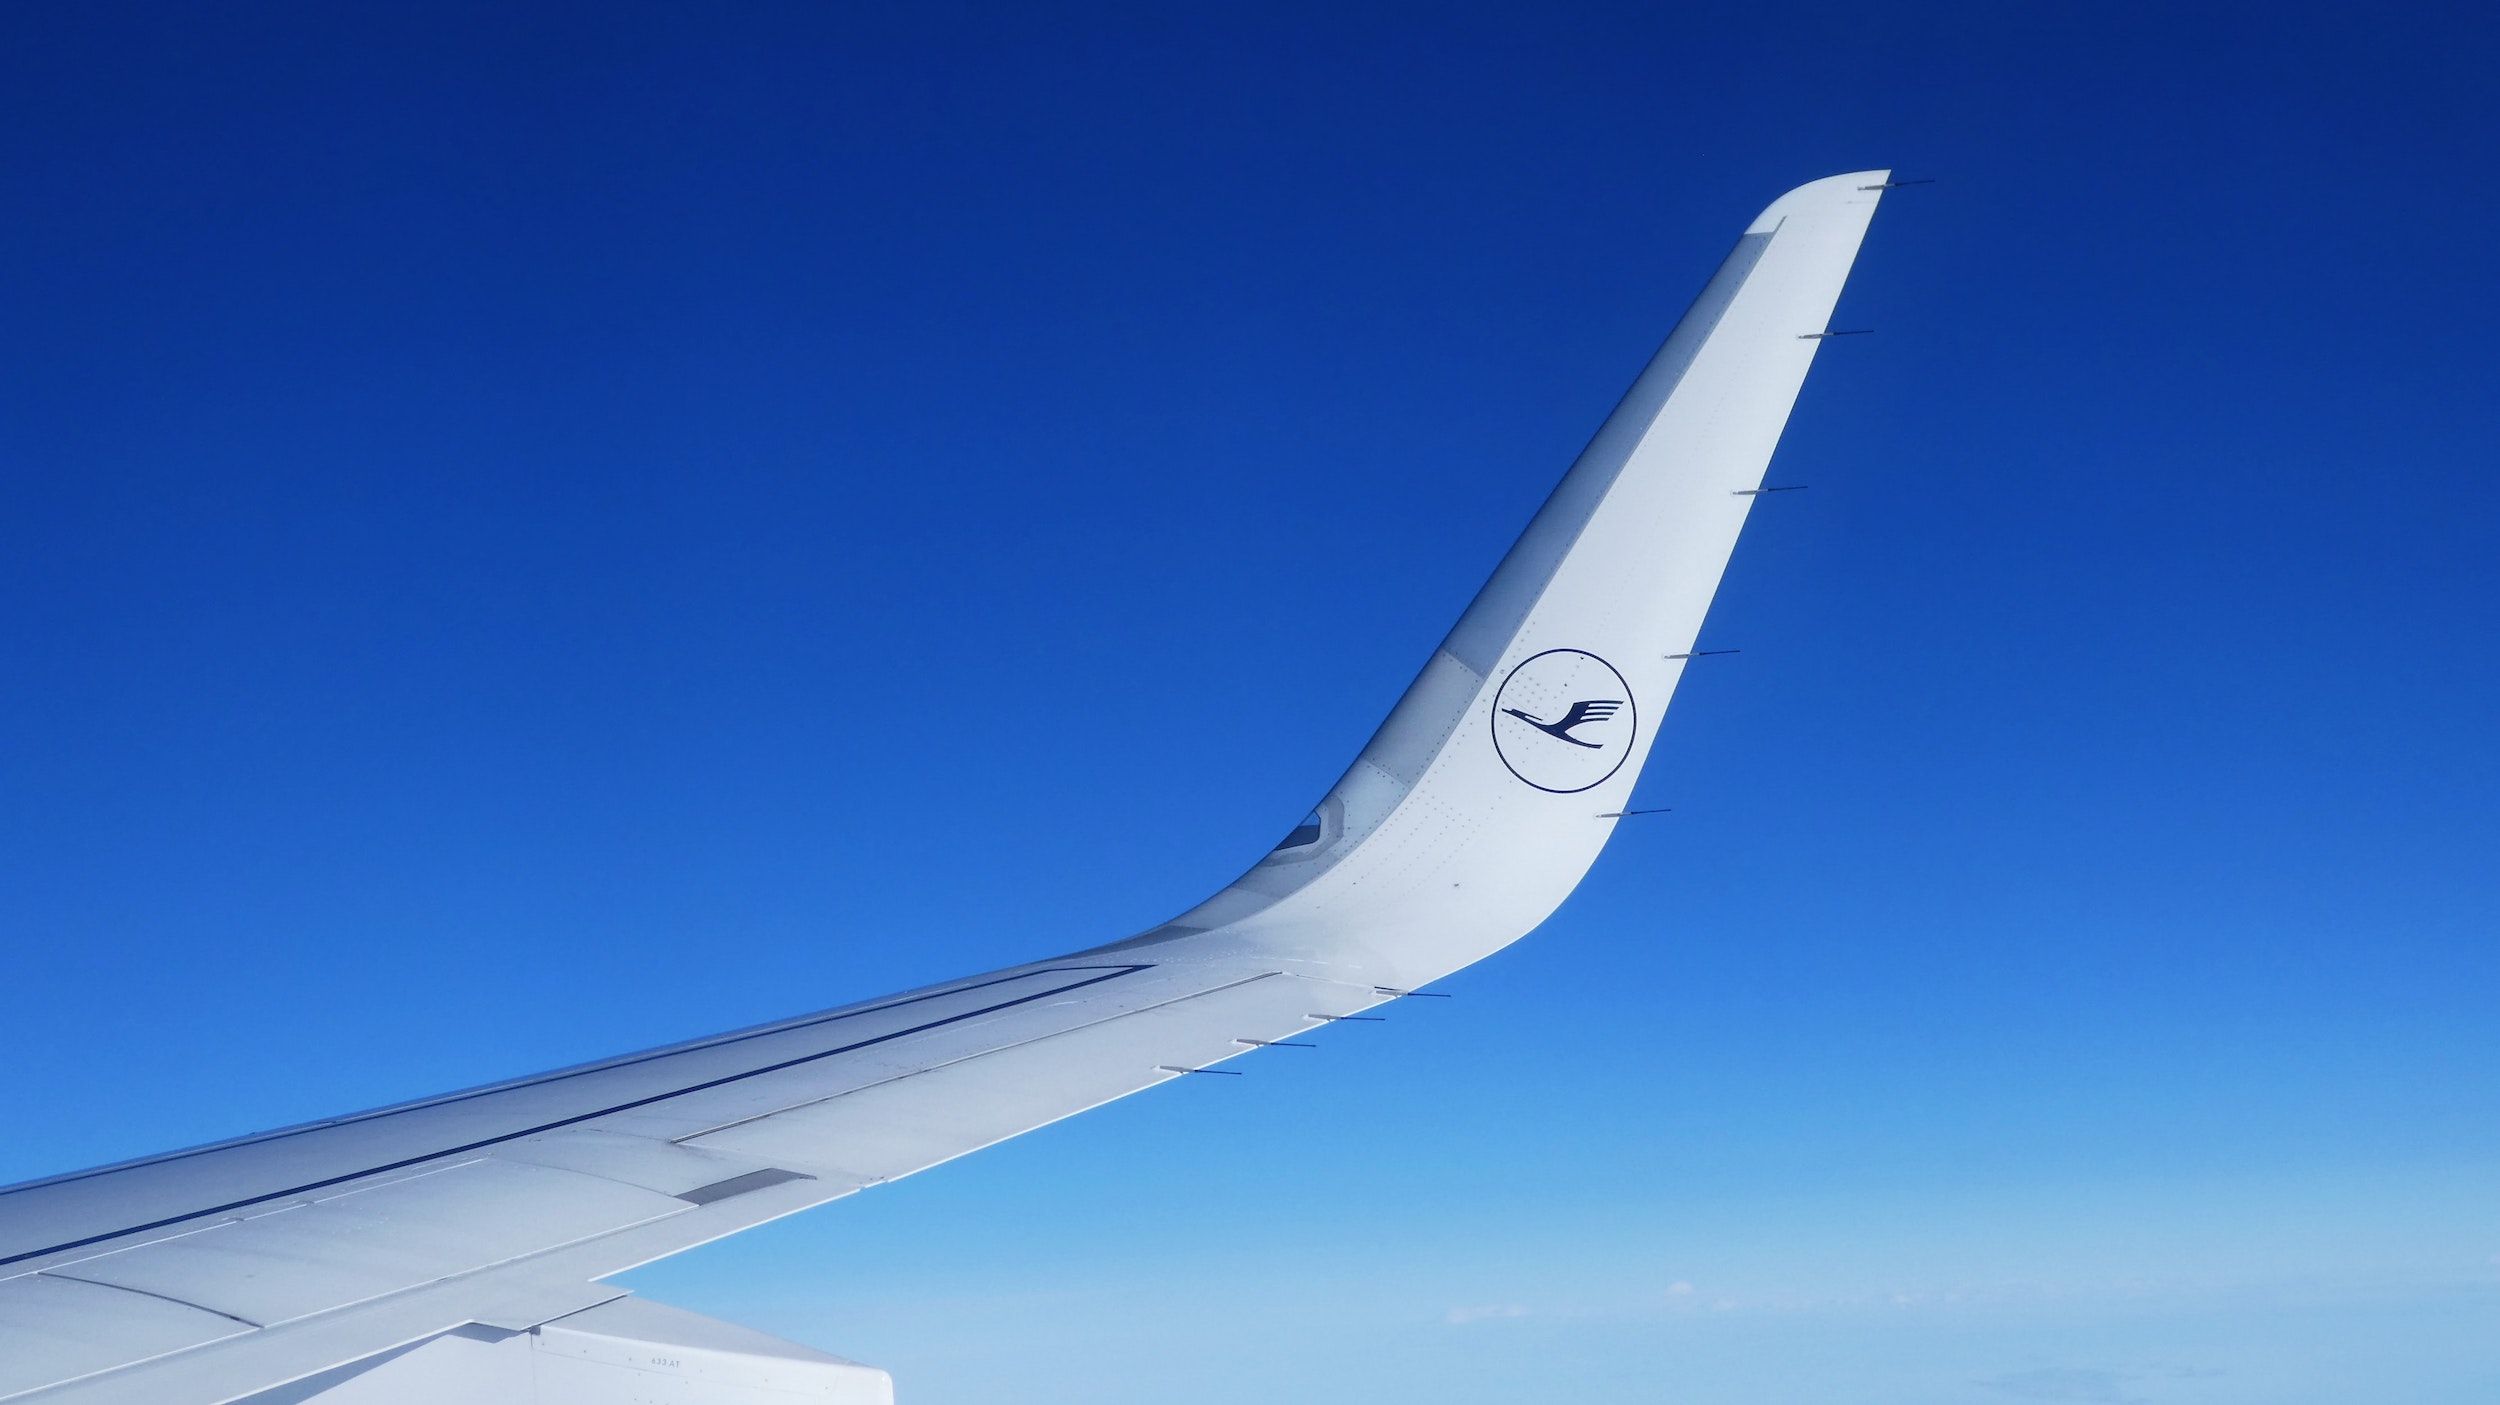 We are part of the Lufthansa family